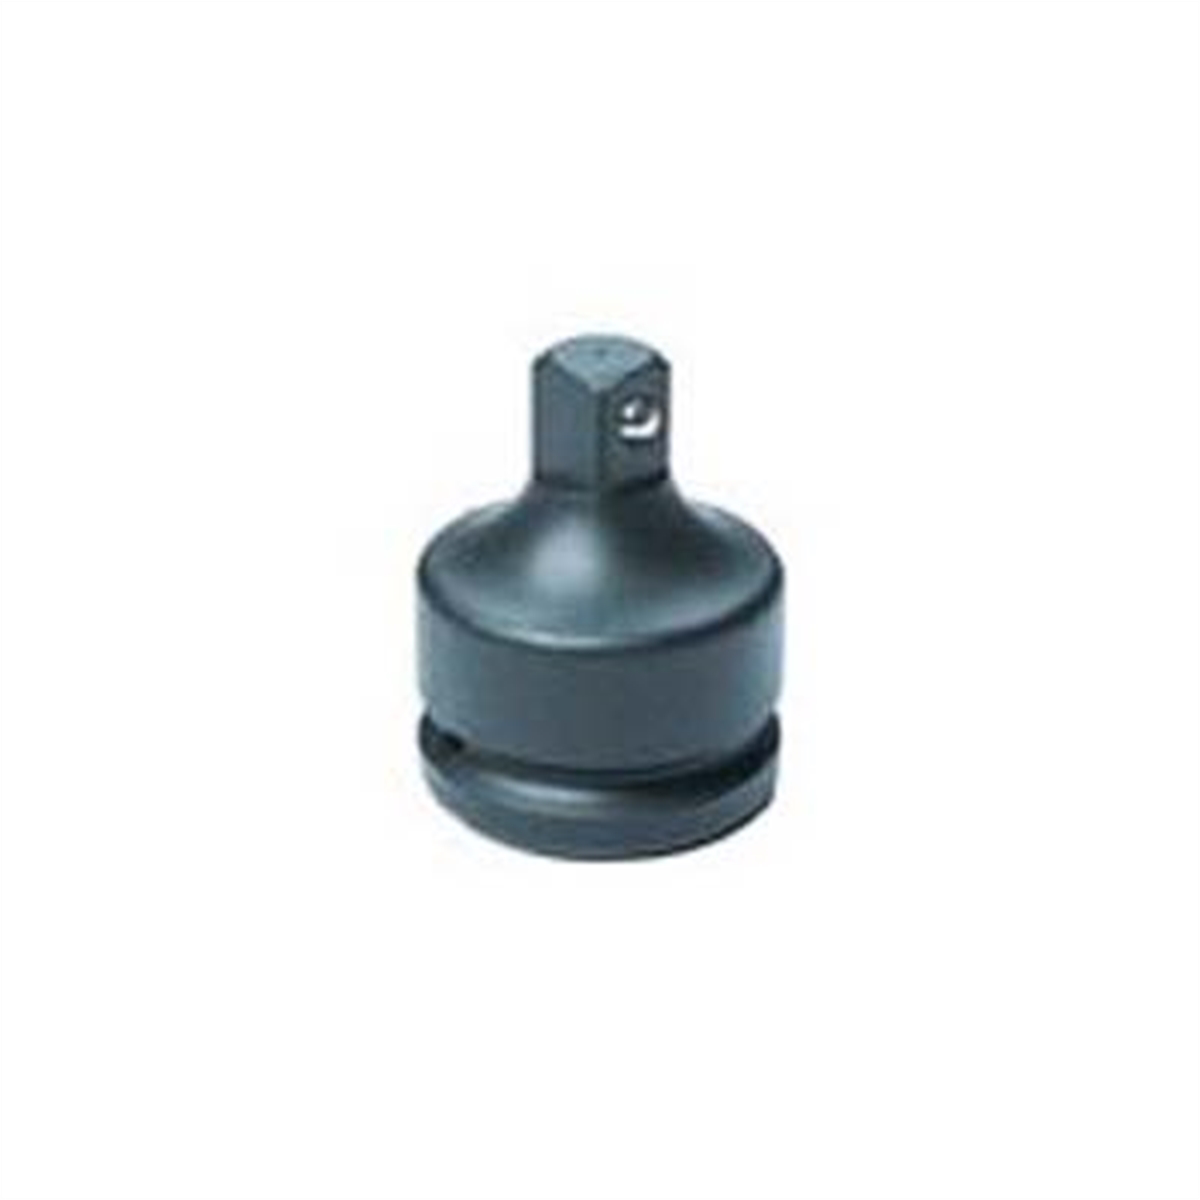 3/4 Inch Female x 1 Inch Male Adapter w/ Friction Ball